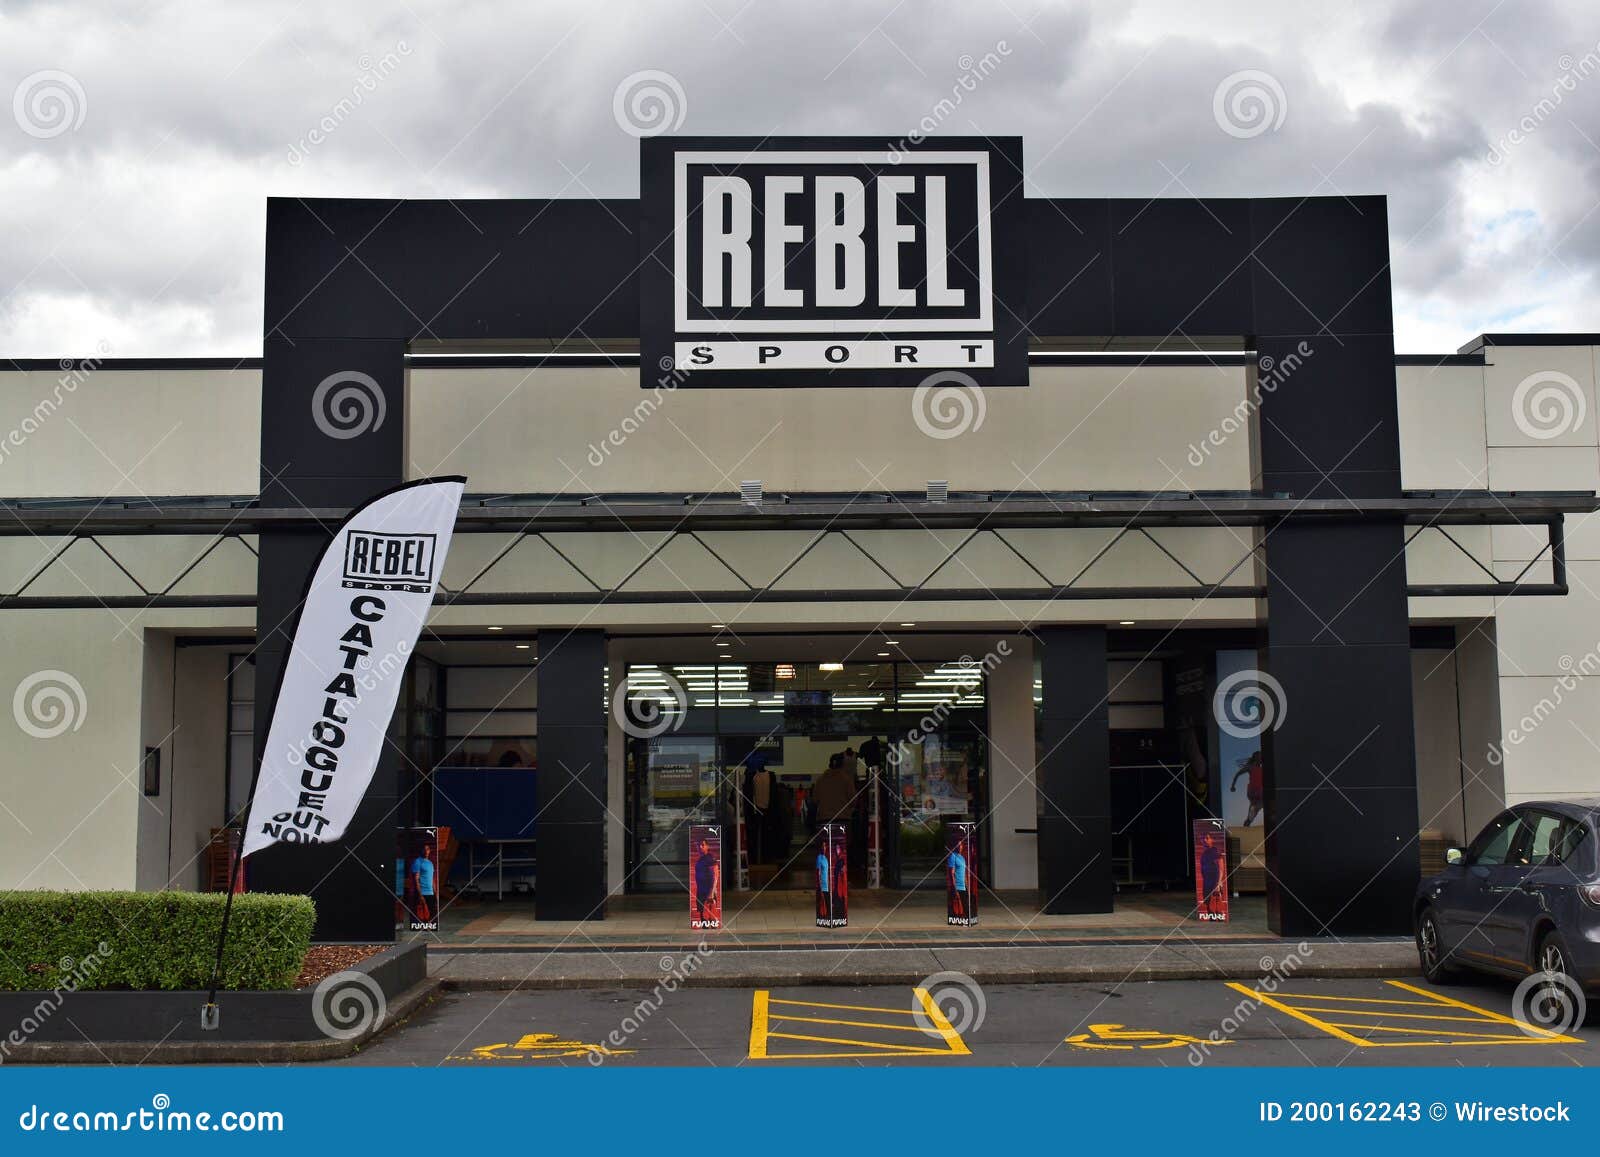 Rebel Sport Super Store in Manukau Editorial Stock Photo - Image of chain,  facade: 200162243